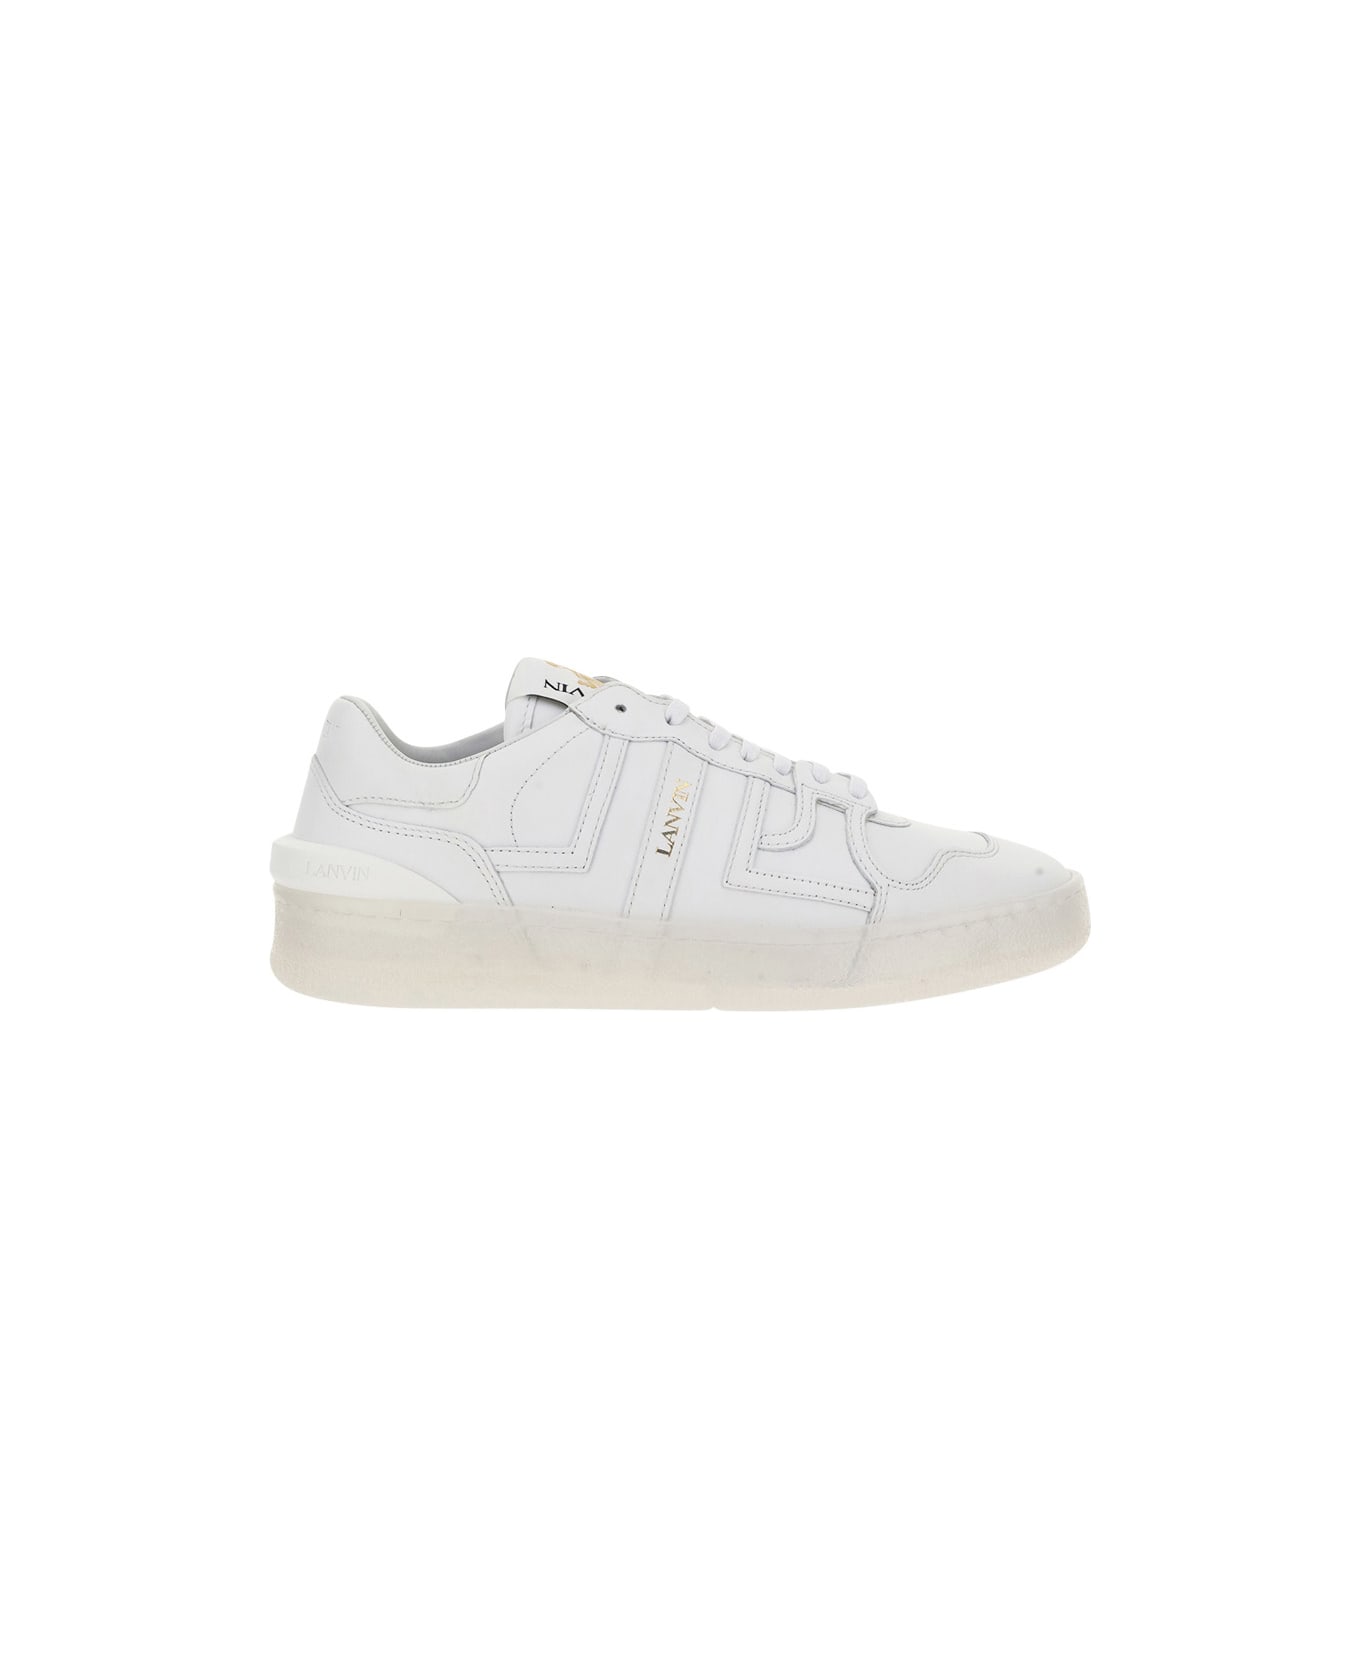 Lanvin Clay Sneakers - White